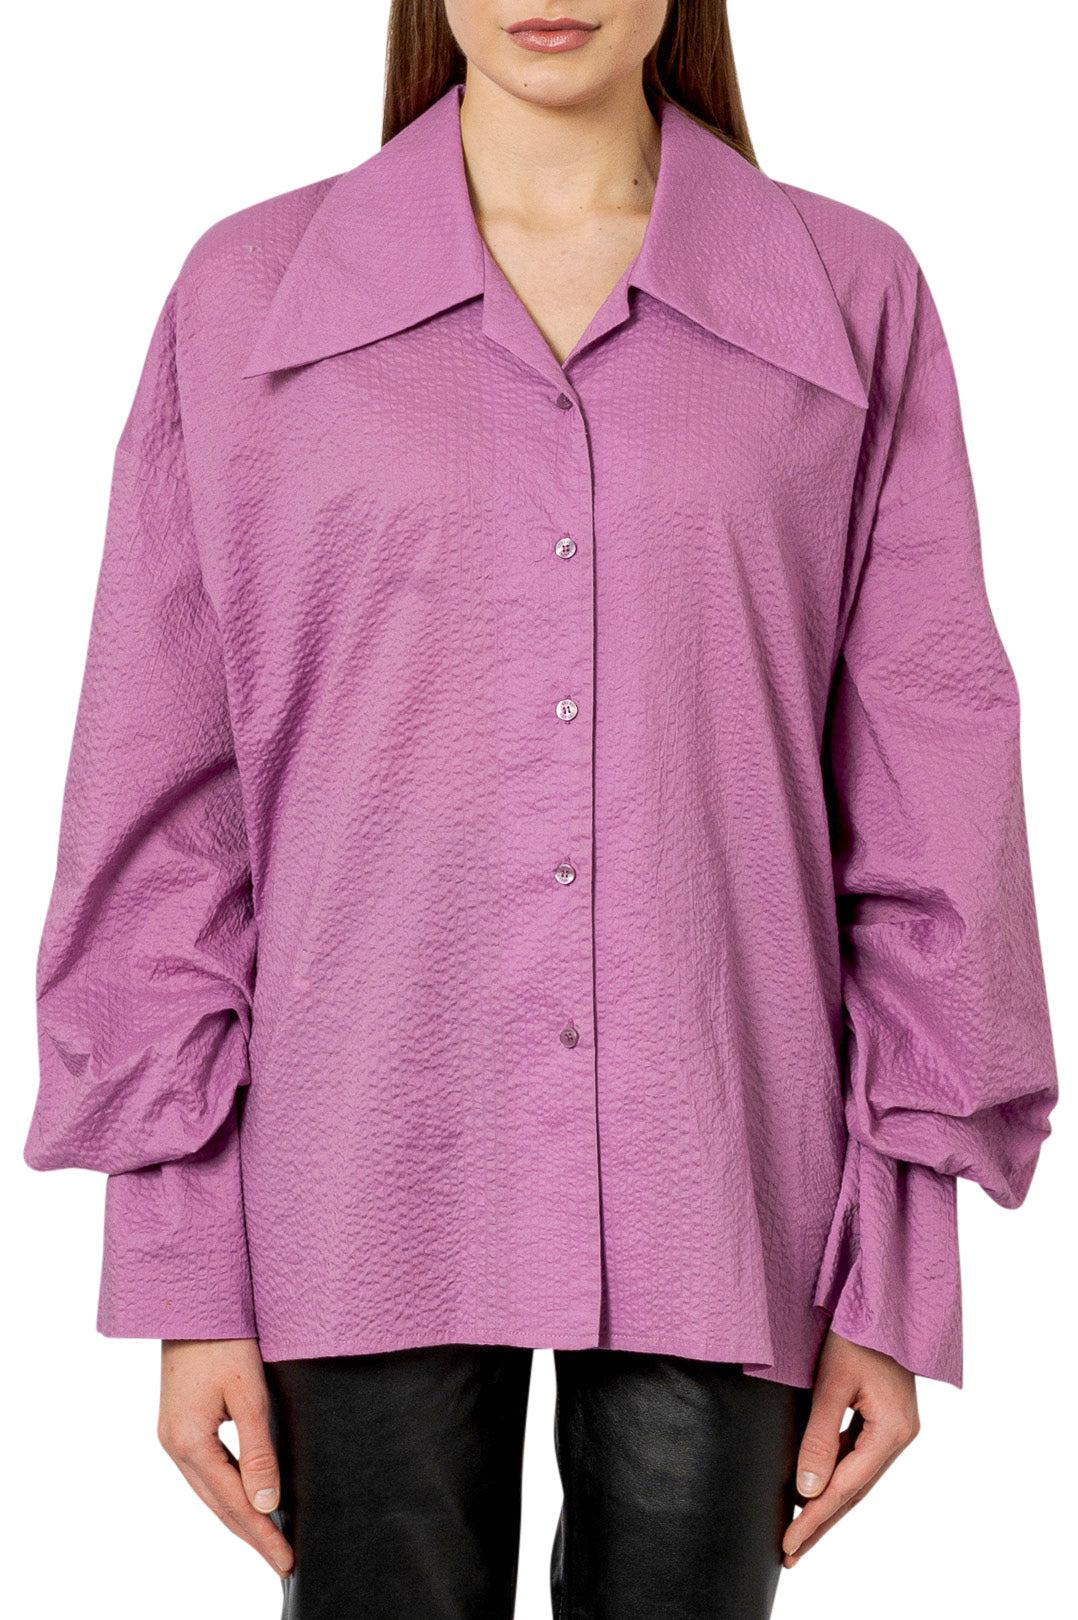 Lebrand - Over-fit shirt with ruffled detail - PELMO SHIRT – D___GALLERY